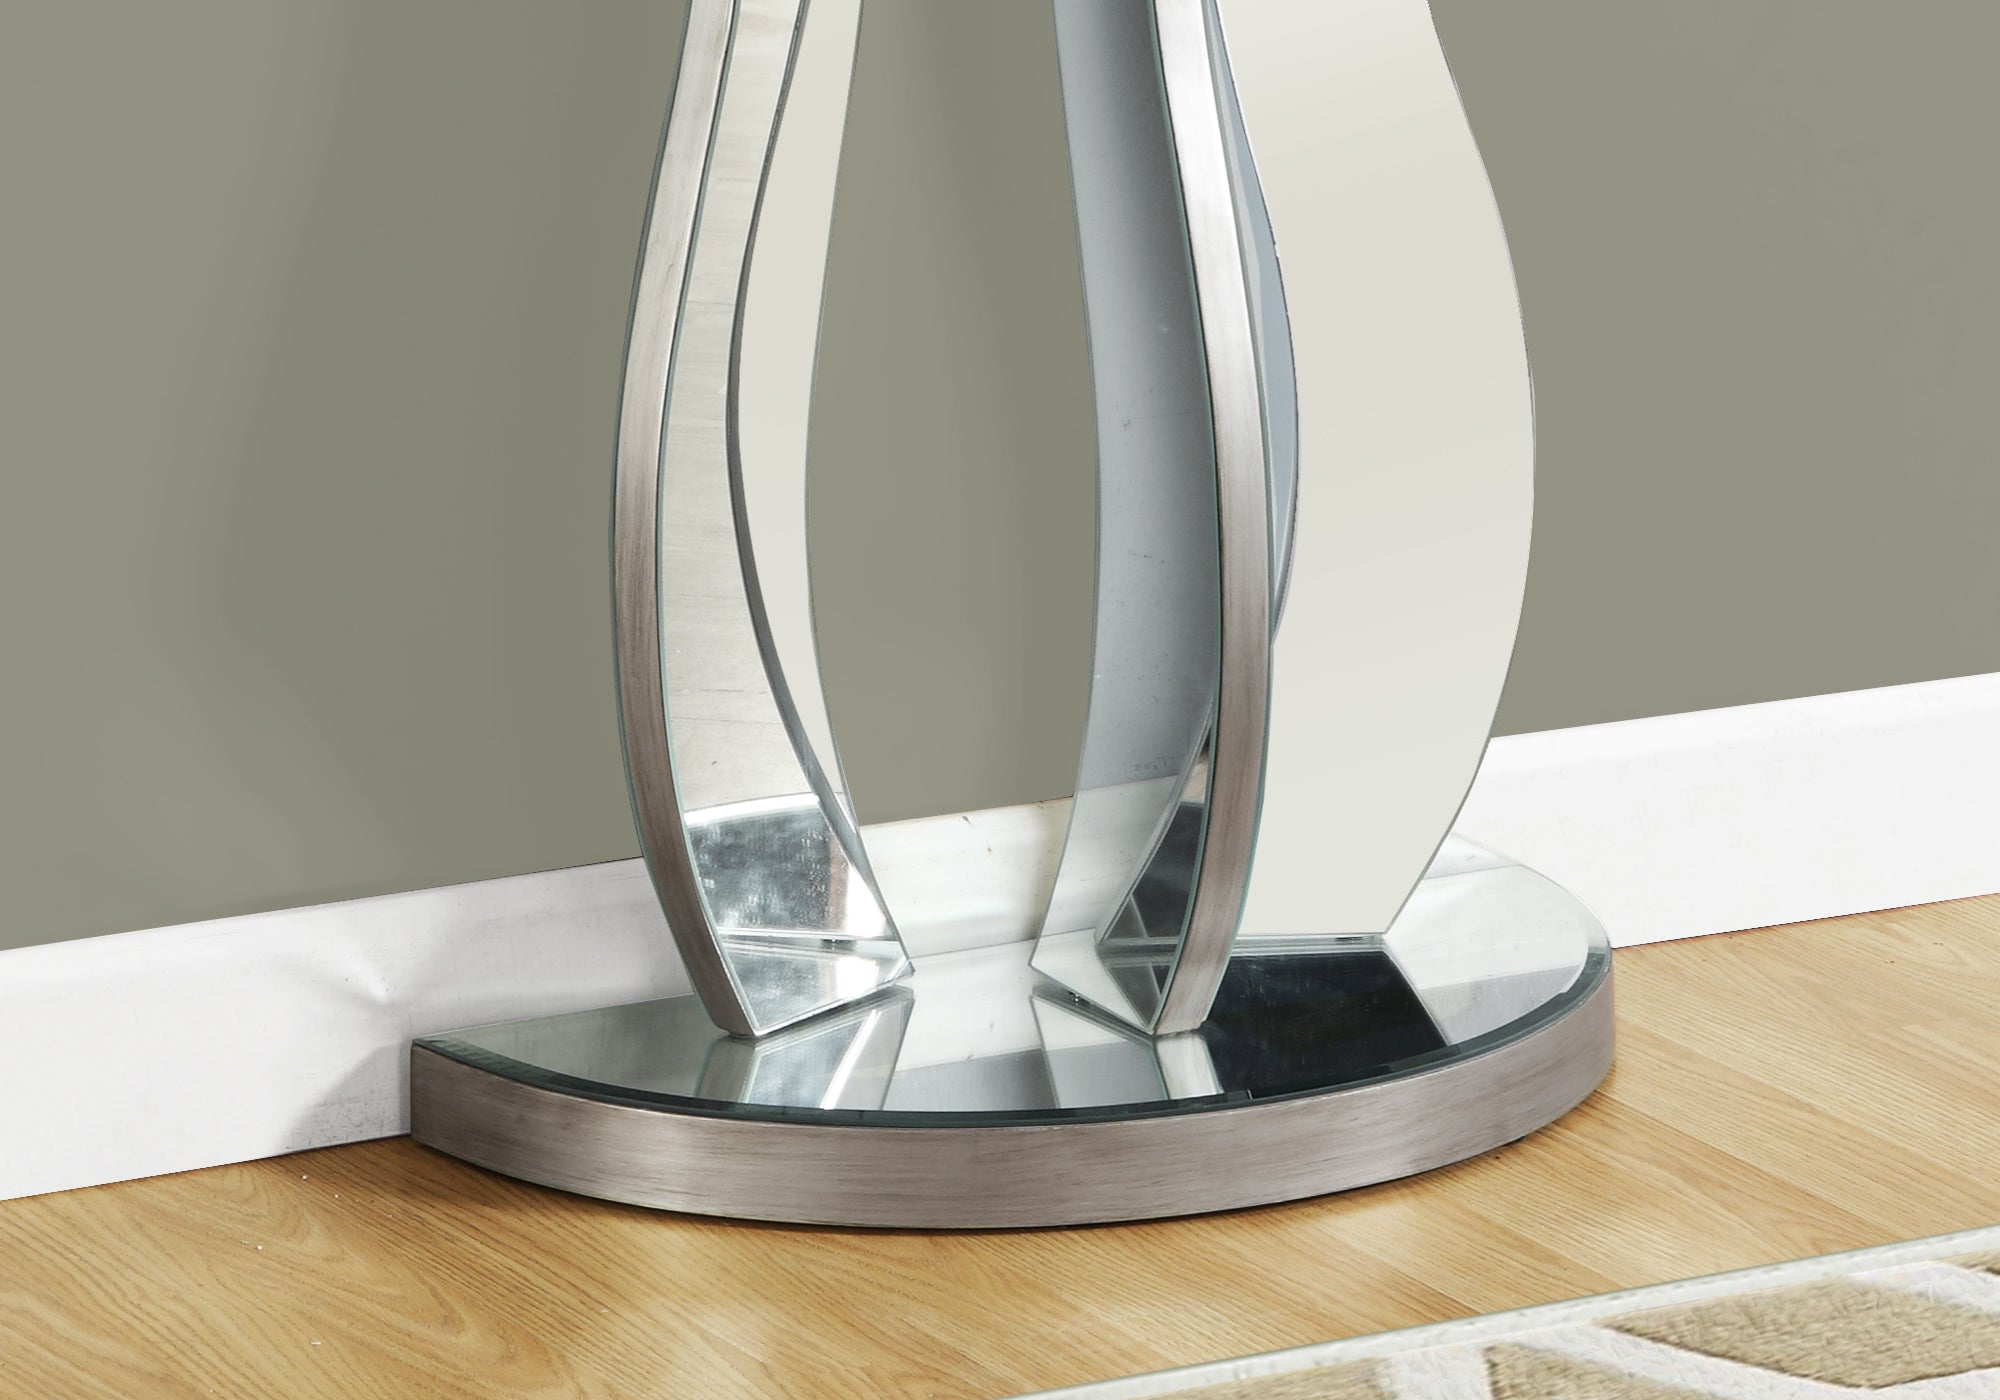 Accent Table - 36L / Brushed Silver / Mirror